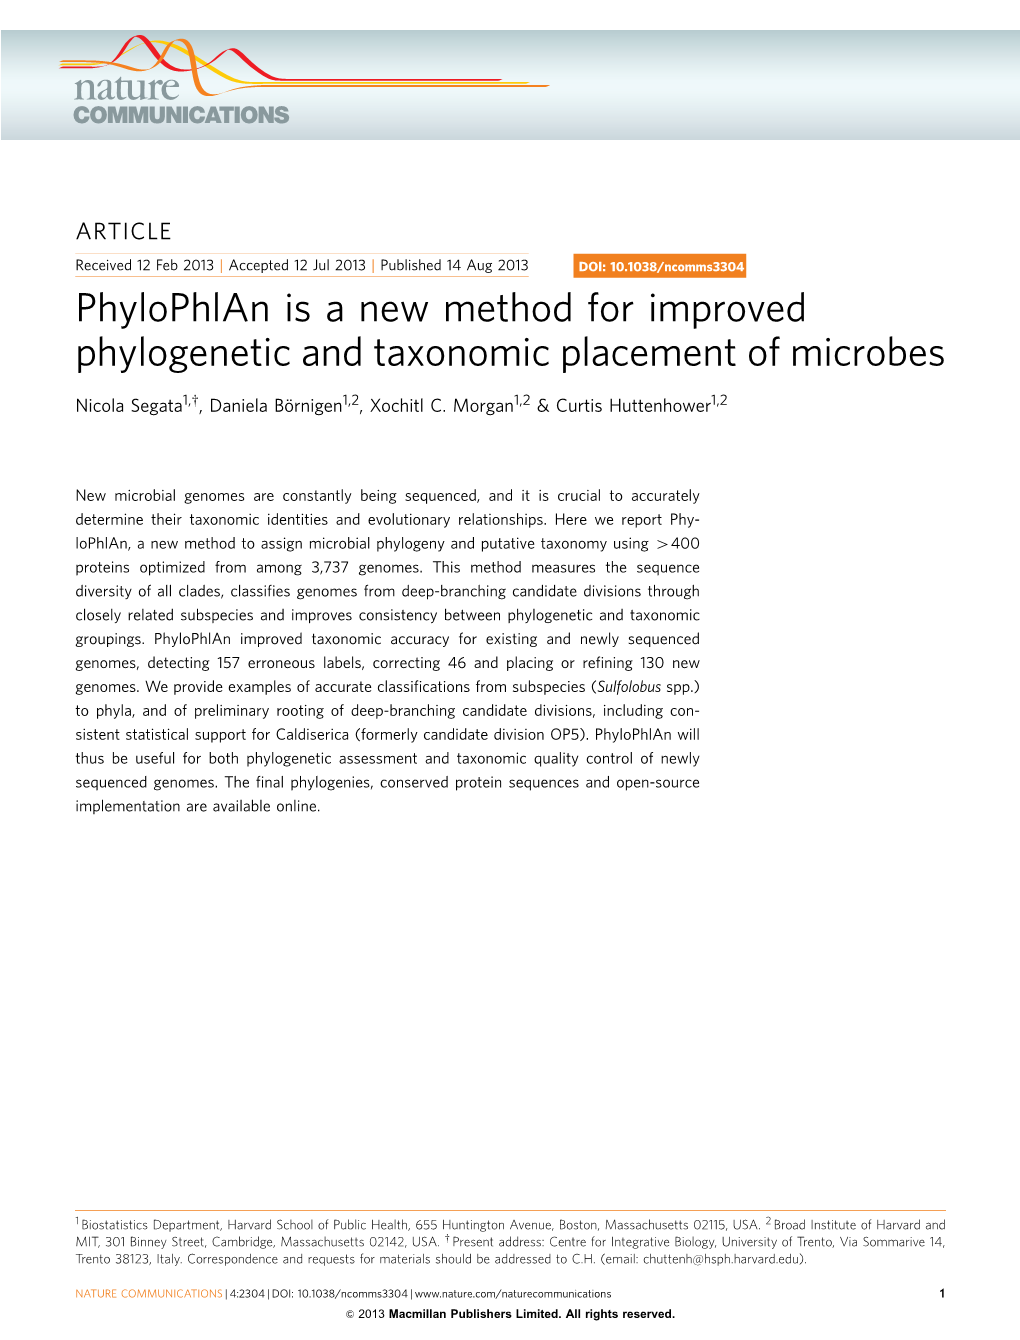 Phylophlan Is a New Method for Improved Phylogenetic and Taxonomic Placement of Microbes